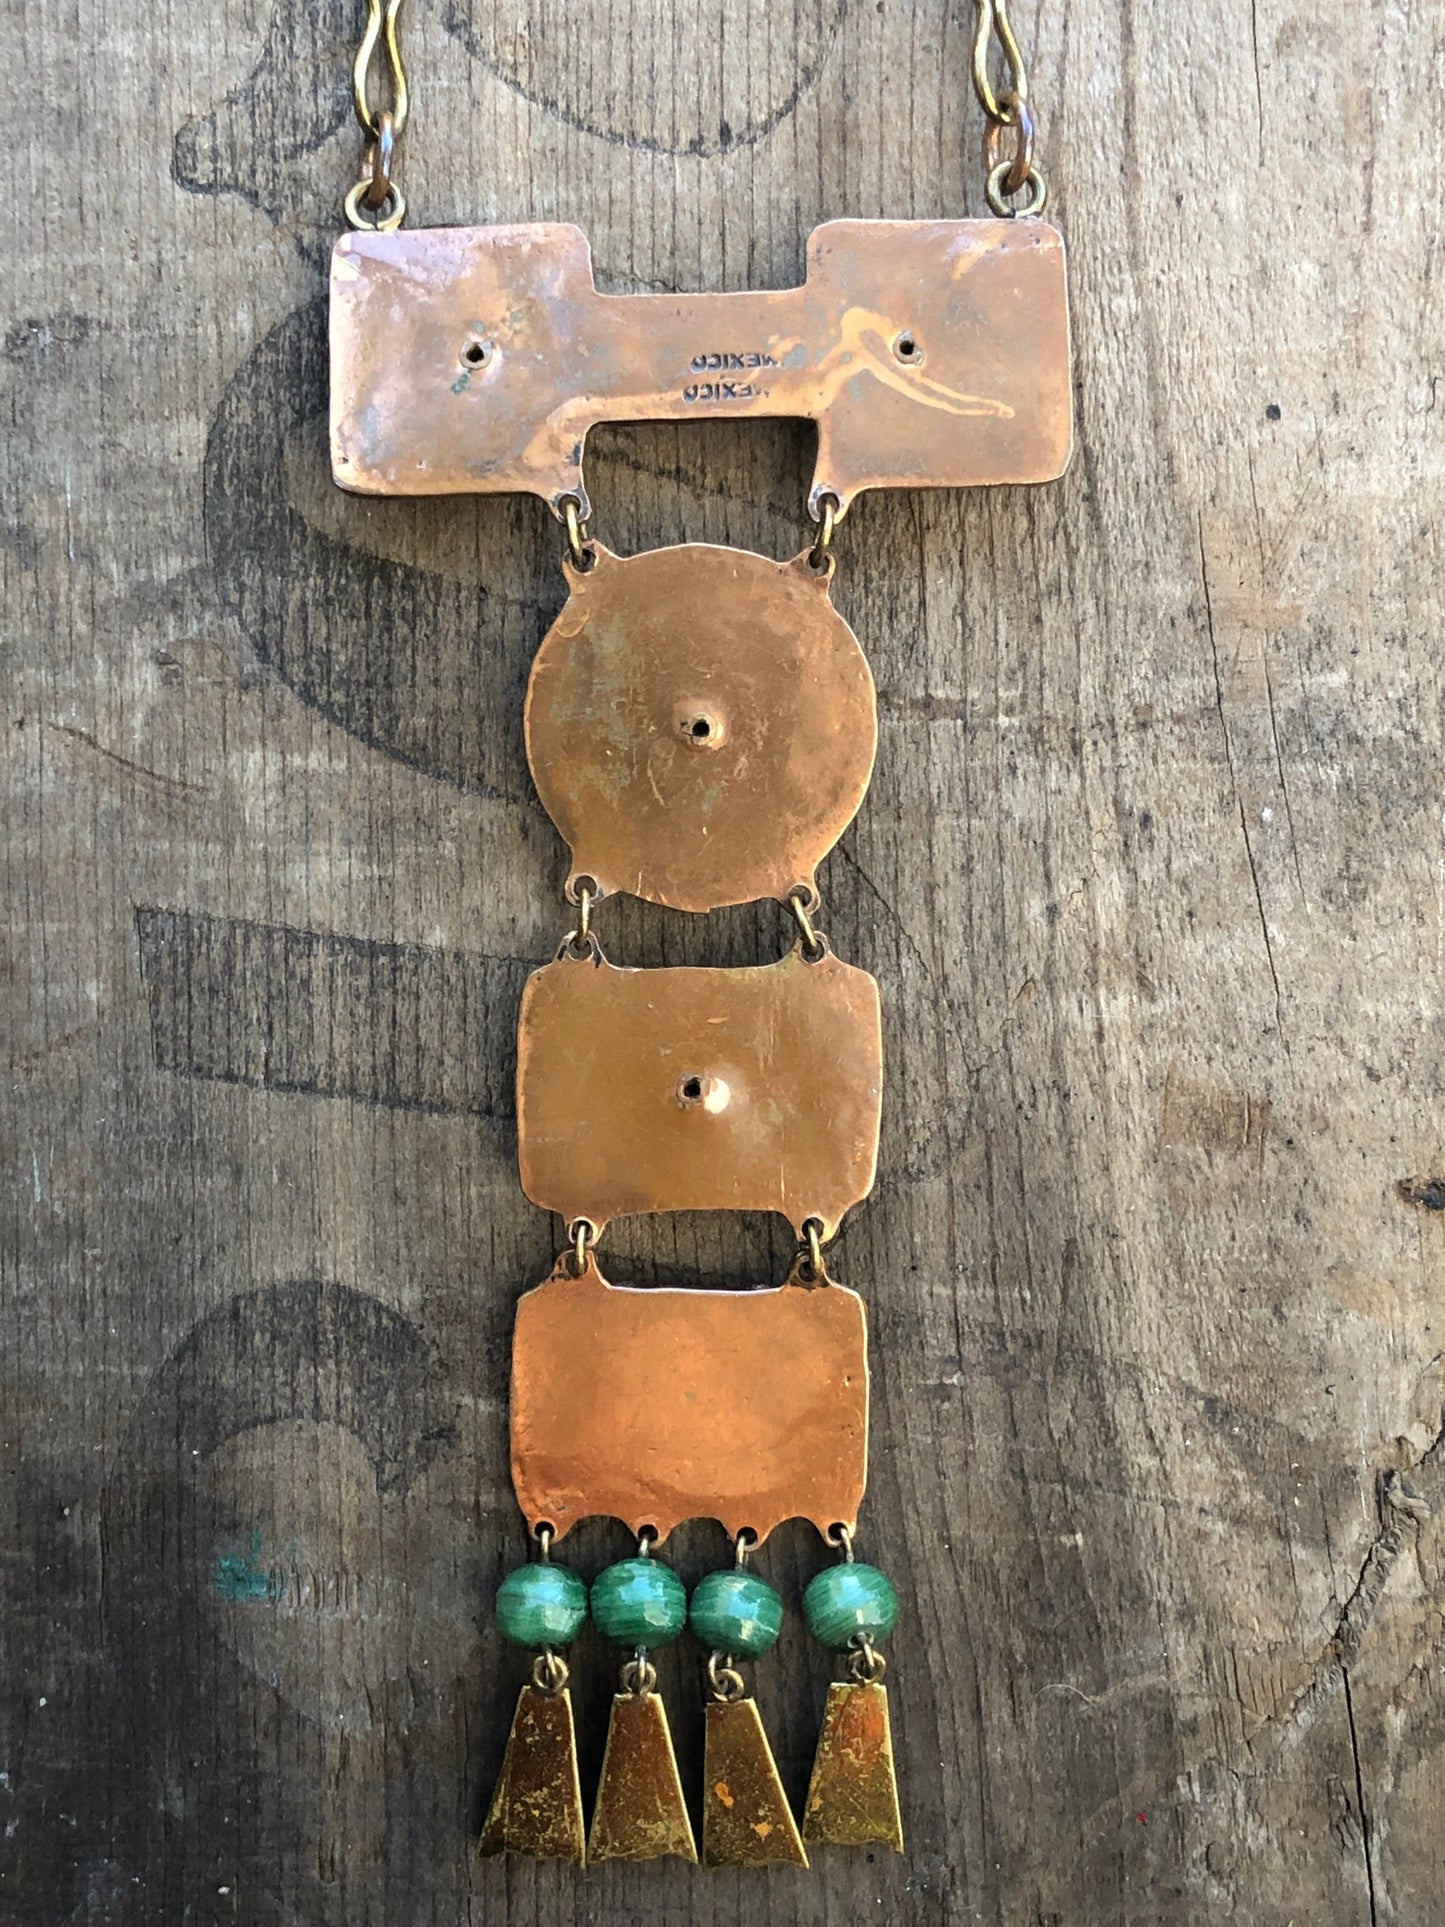 Vintage Mexican Mixed Metal Copper & Brass with Green Jade Agate Gemstone Necklace